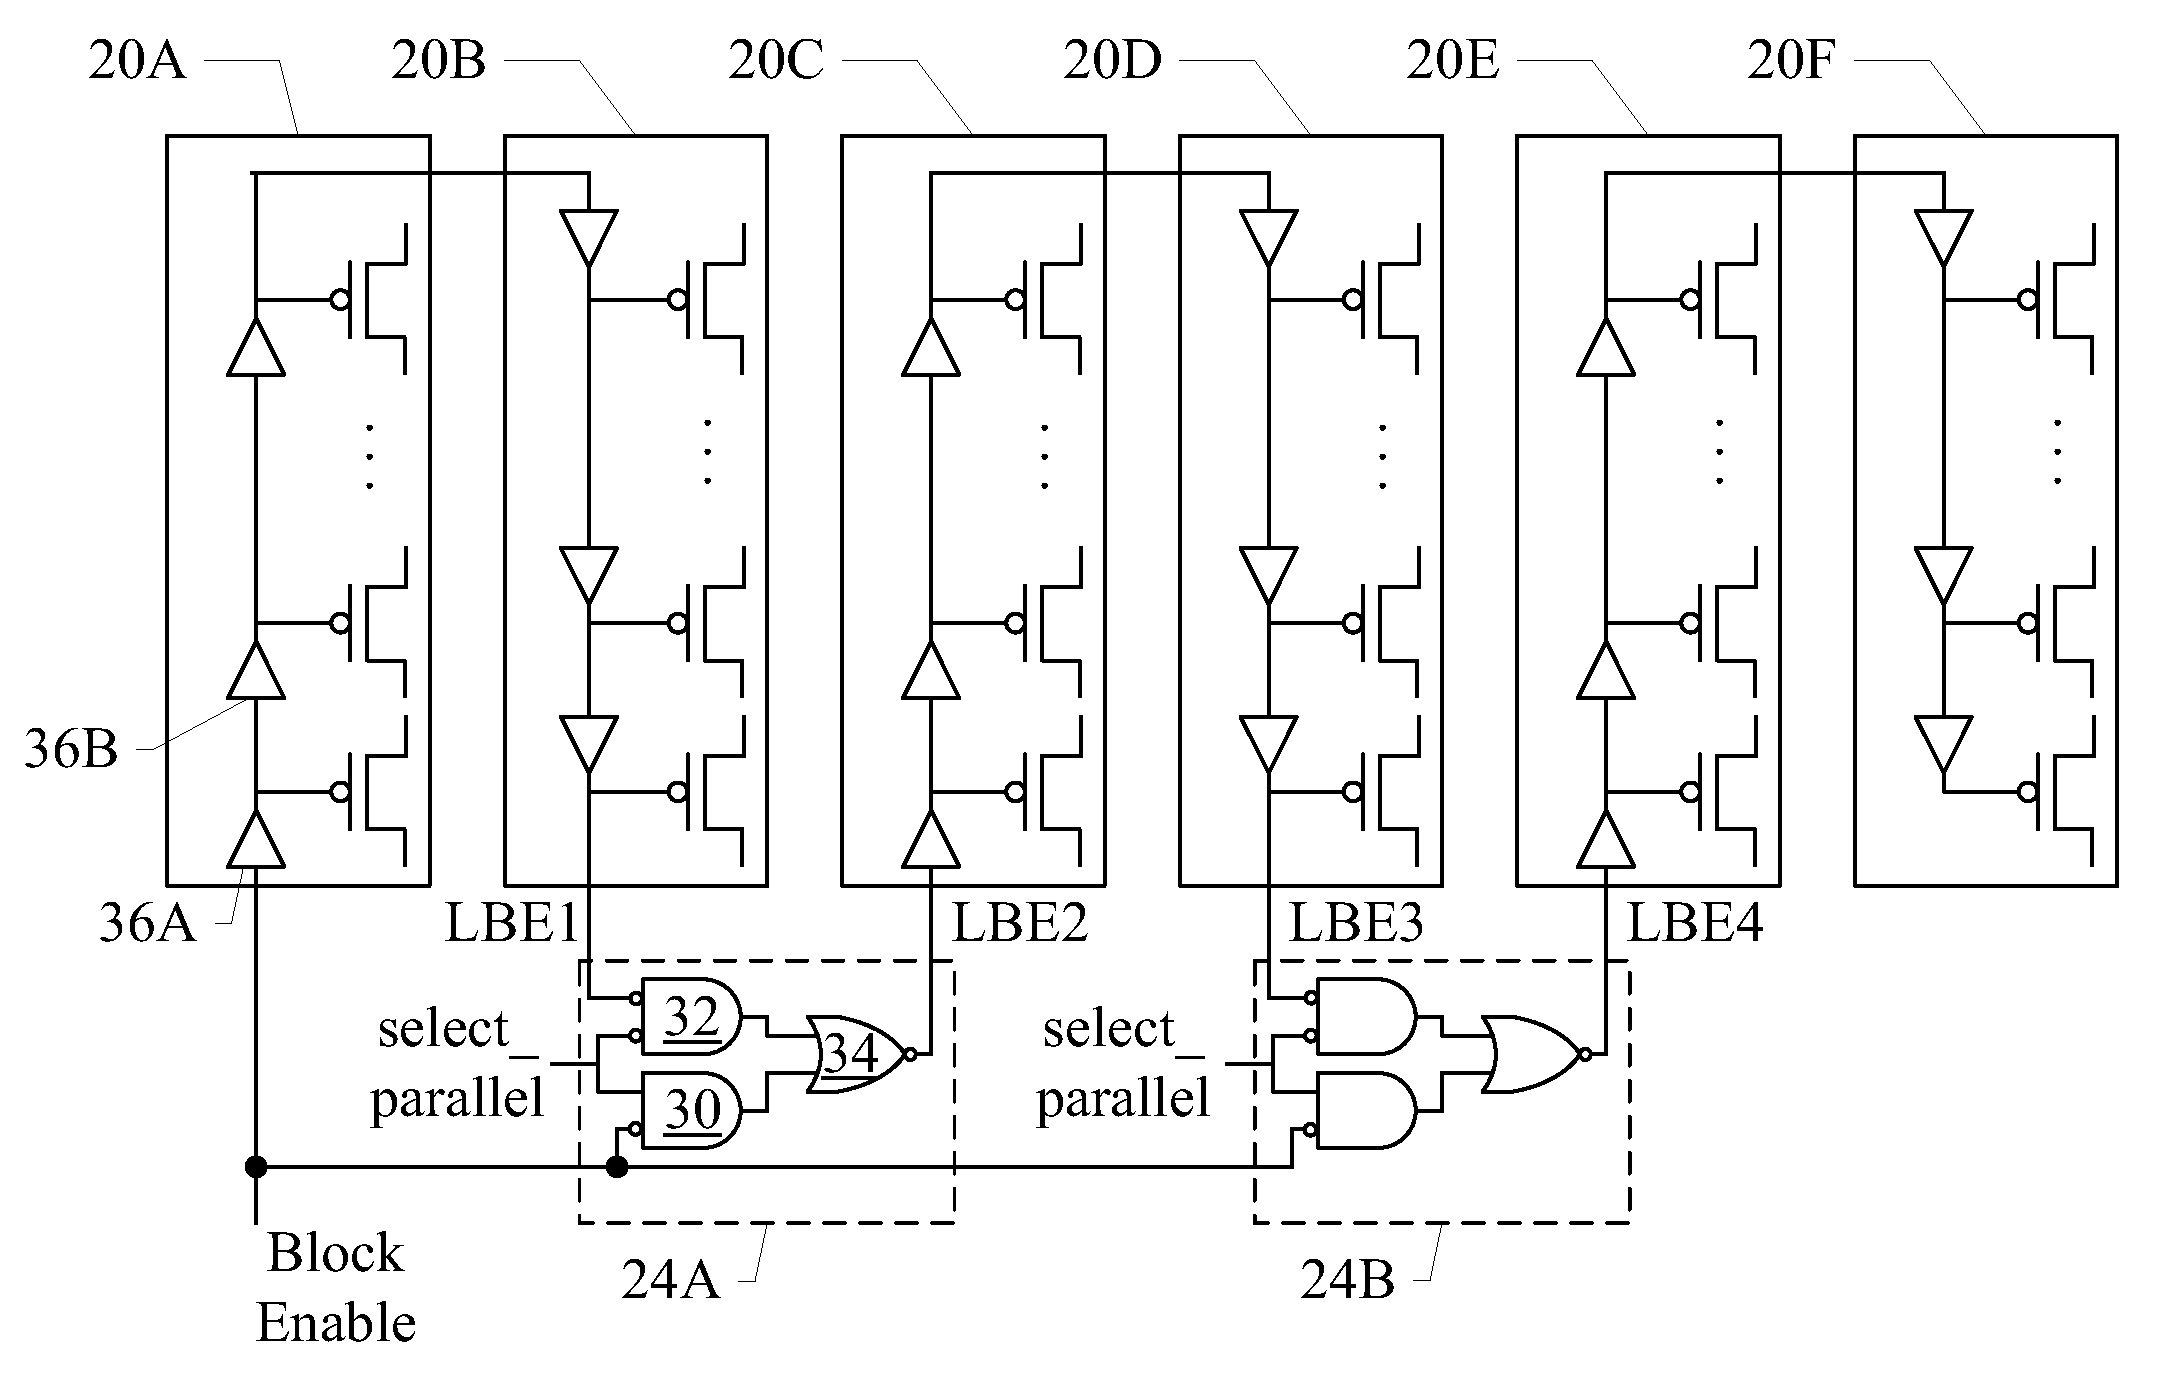 Power switch ramp rate control using programmable connection to switches